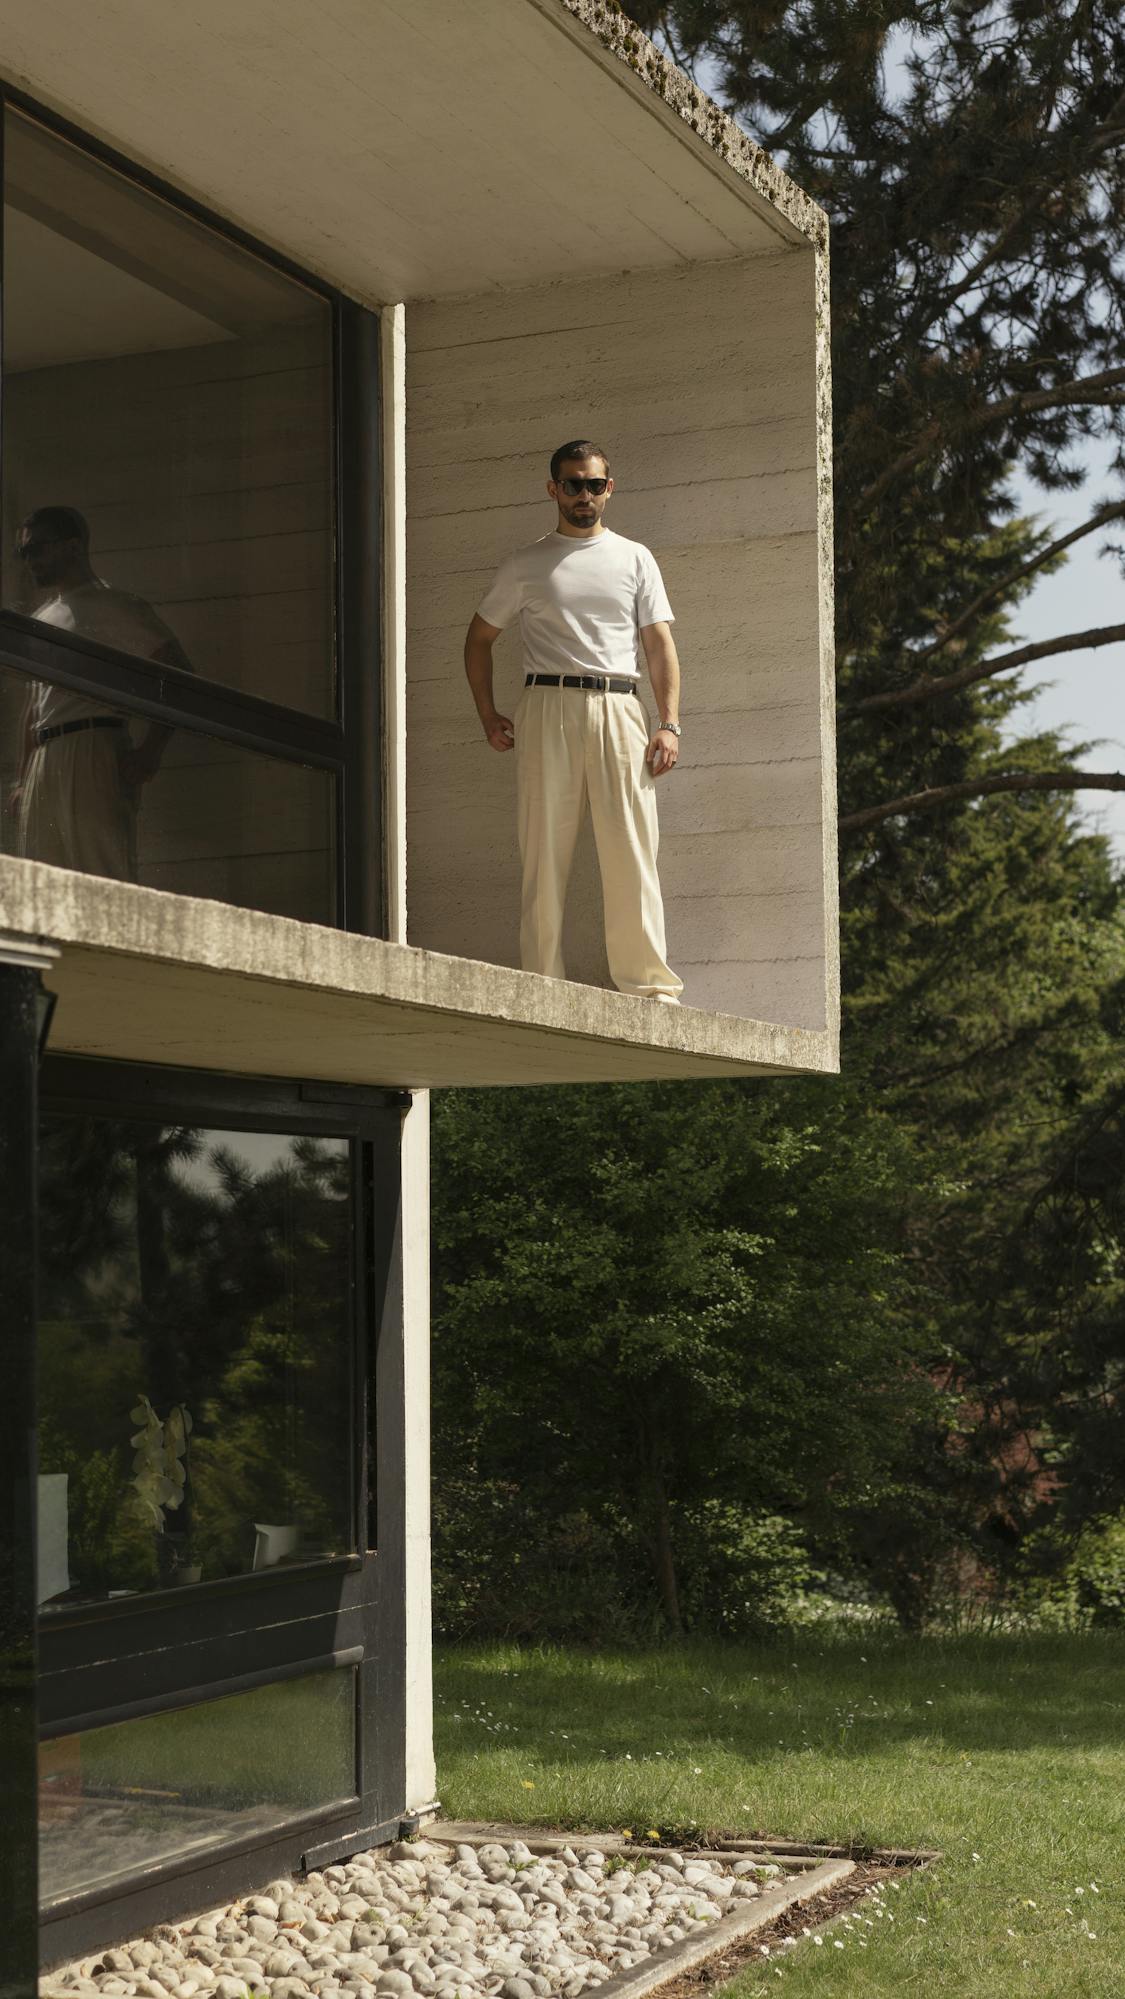 Dali Benssalah stands on a porch at a modern house wearing sunglasses, khakis and a white T-shirt.